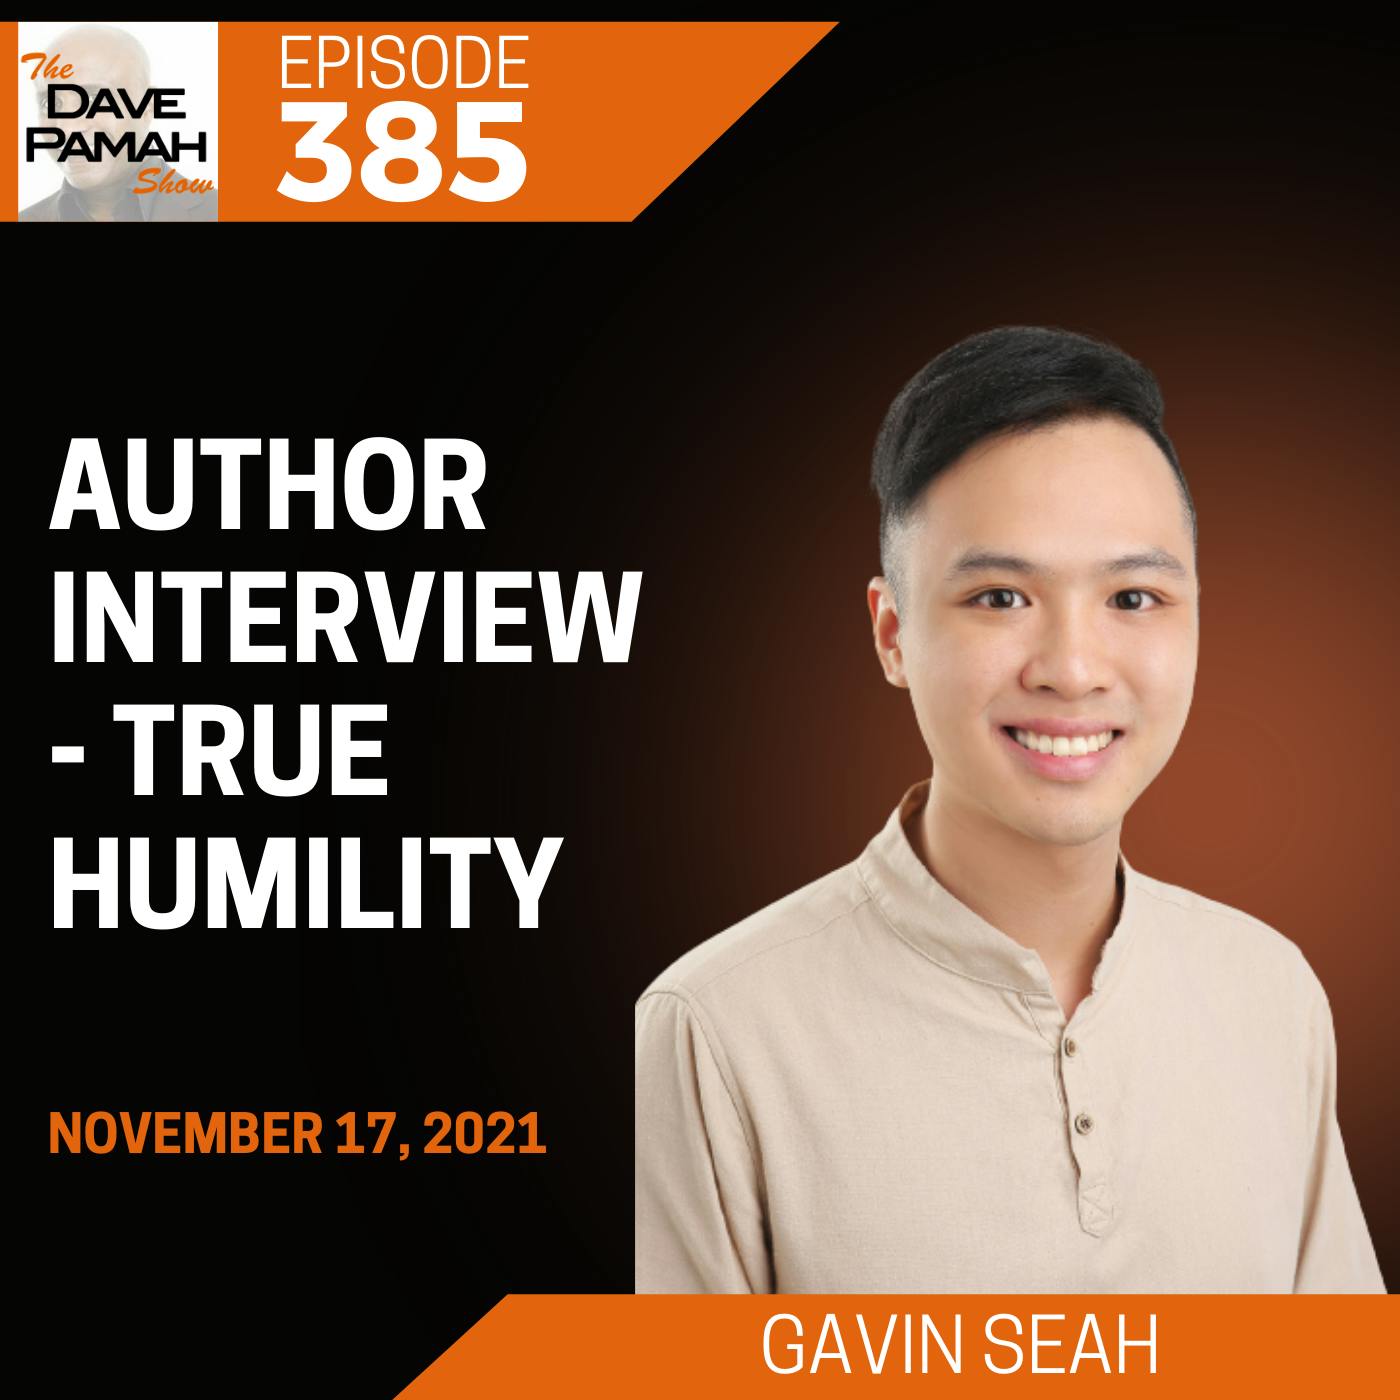 Author Interview - True Humility with Gavin Seah Image